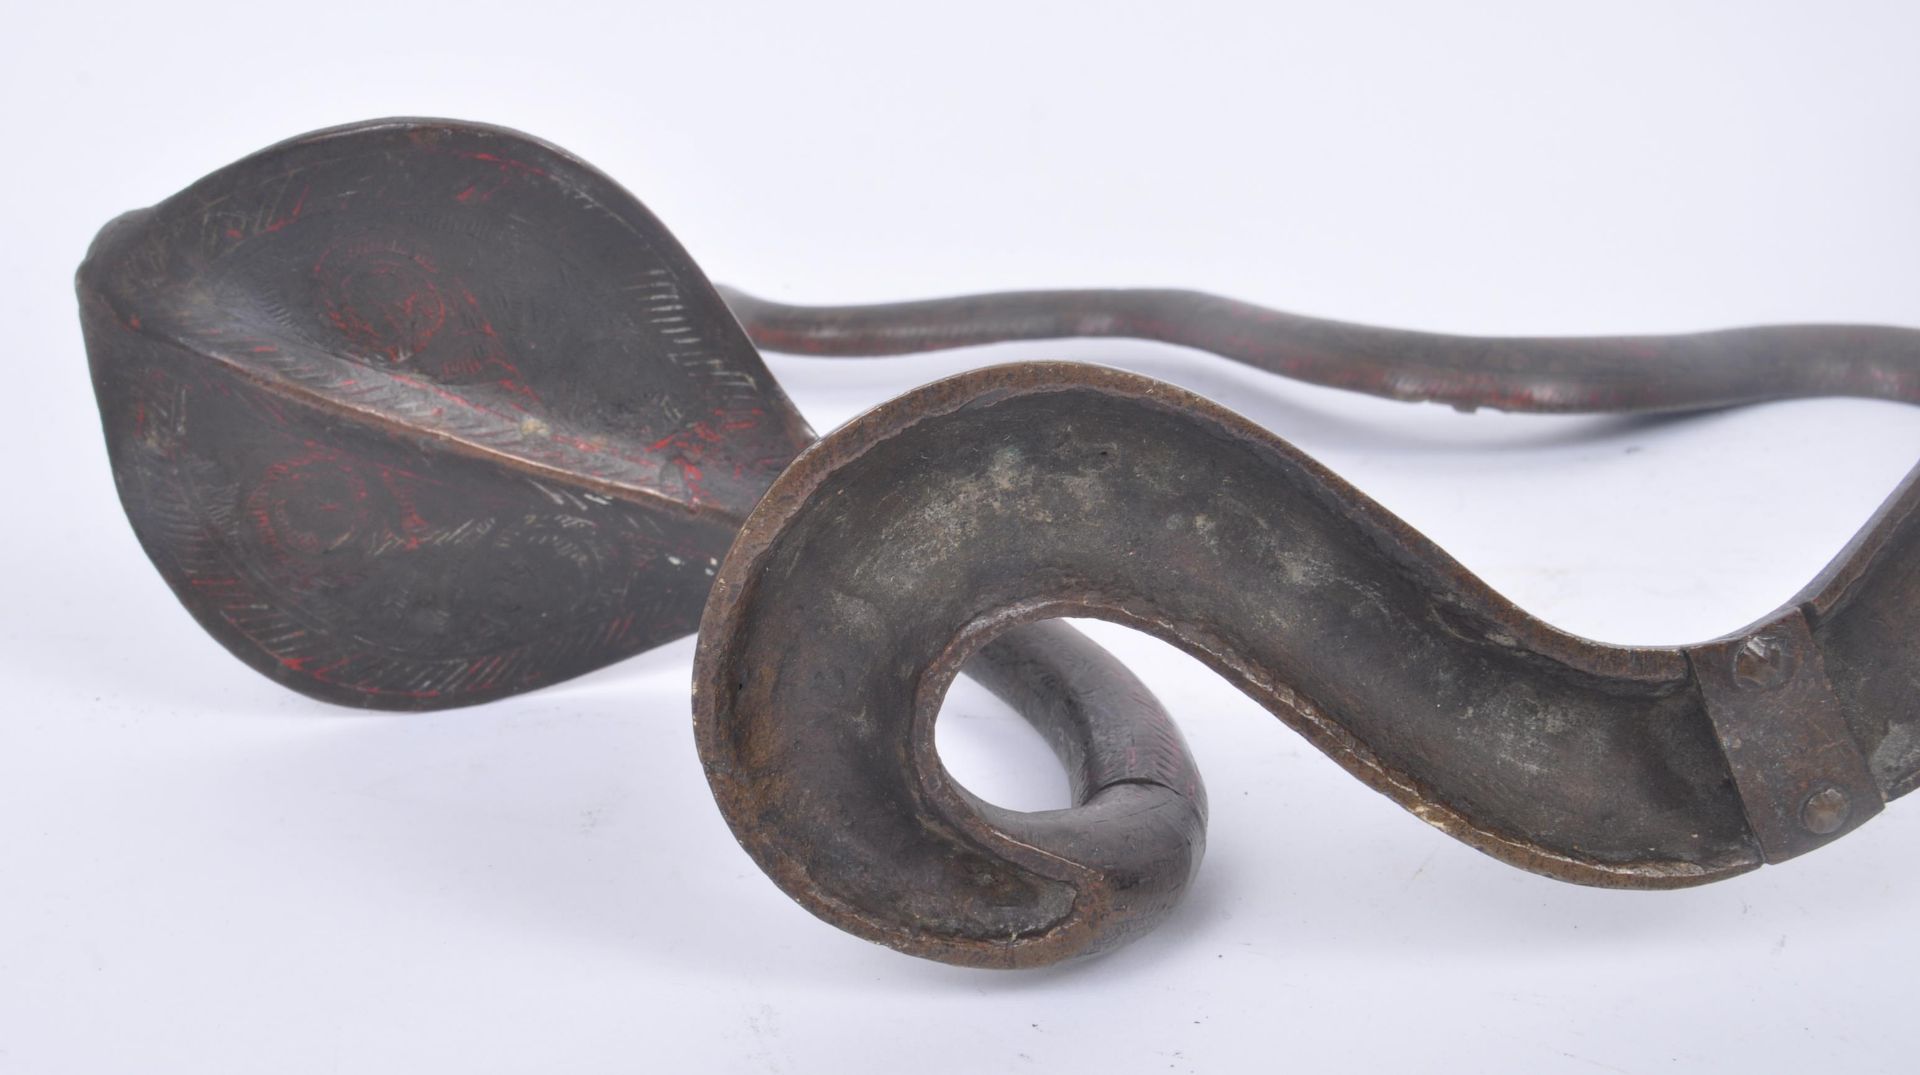 PAIR OF EARLY 20TH CENTURY PERSIAN BRONZE WALL SNAKES - Image 6 of 8